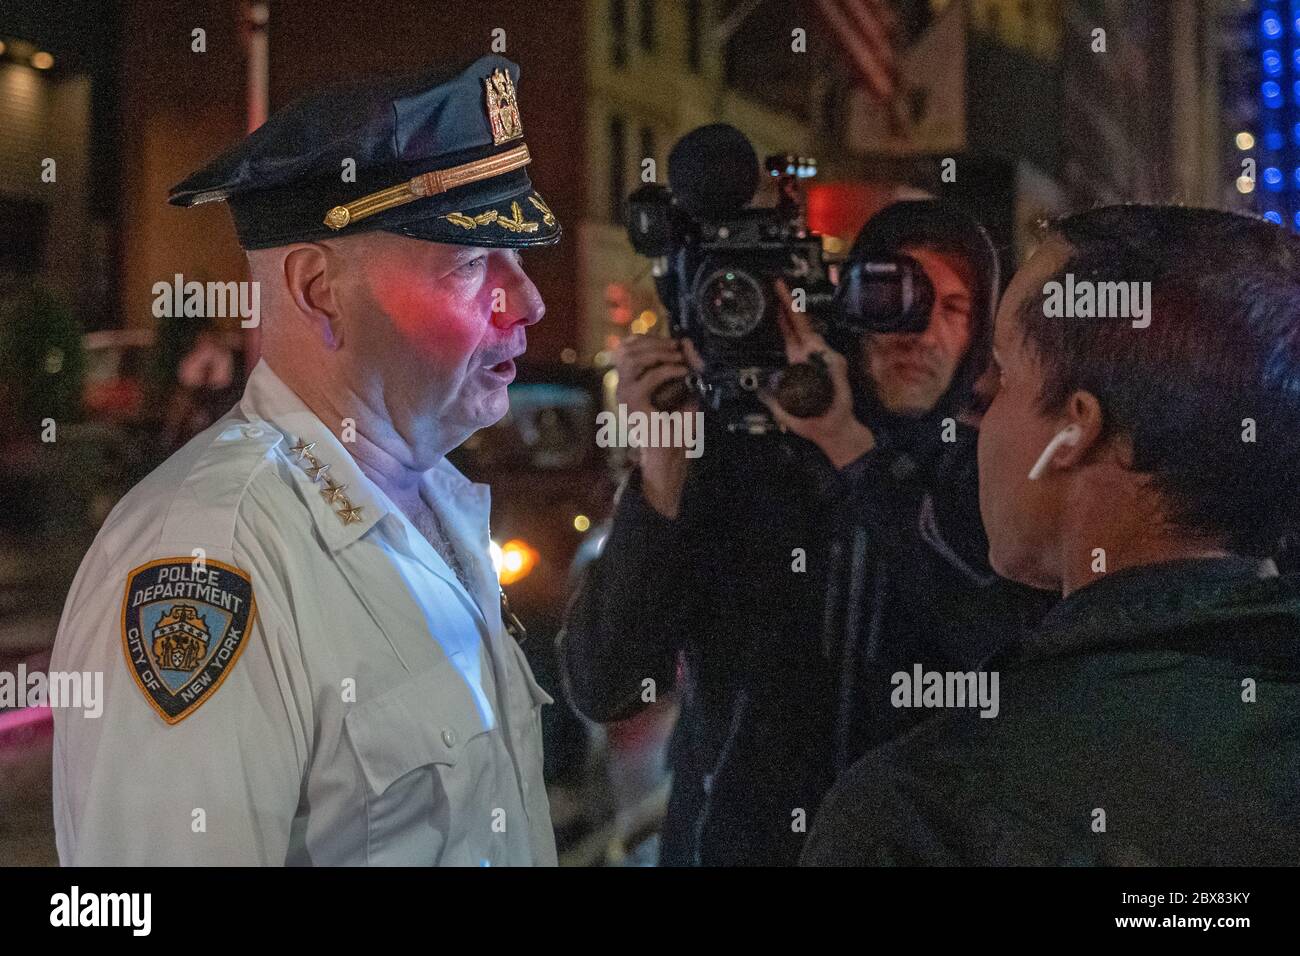 NEW YORK, NY - JUNE 03: Chief of Department Terence Monahan, the New York Police Department's highest-ranking uniformed officer, speaks to the media a Stock Photo